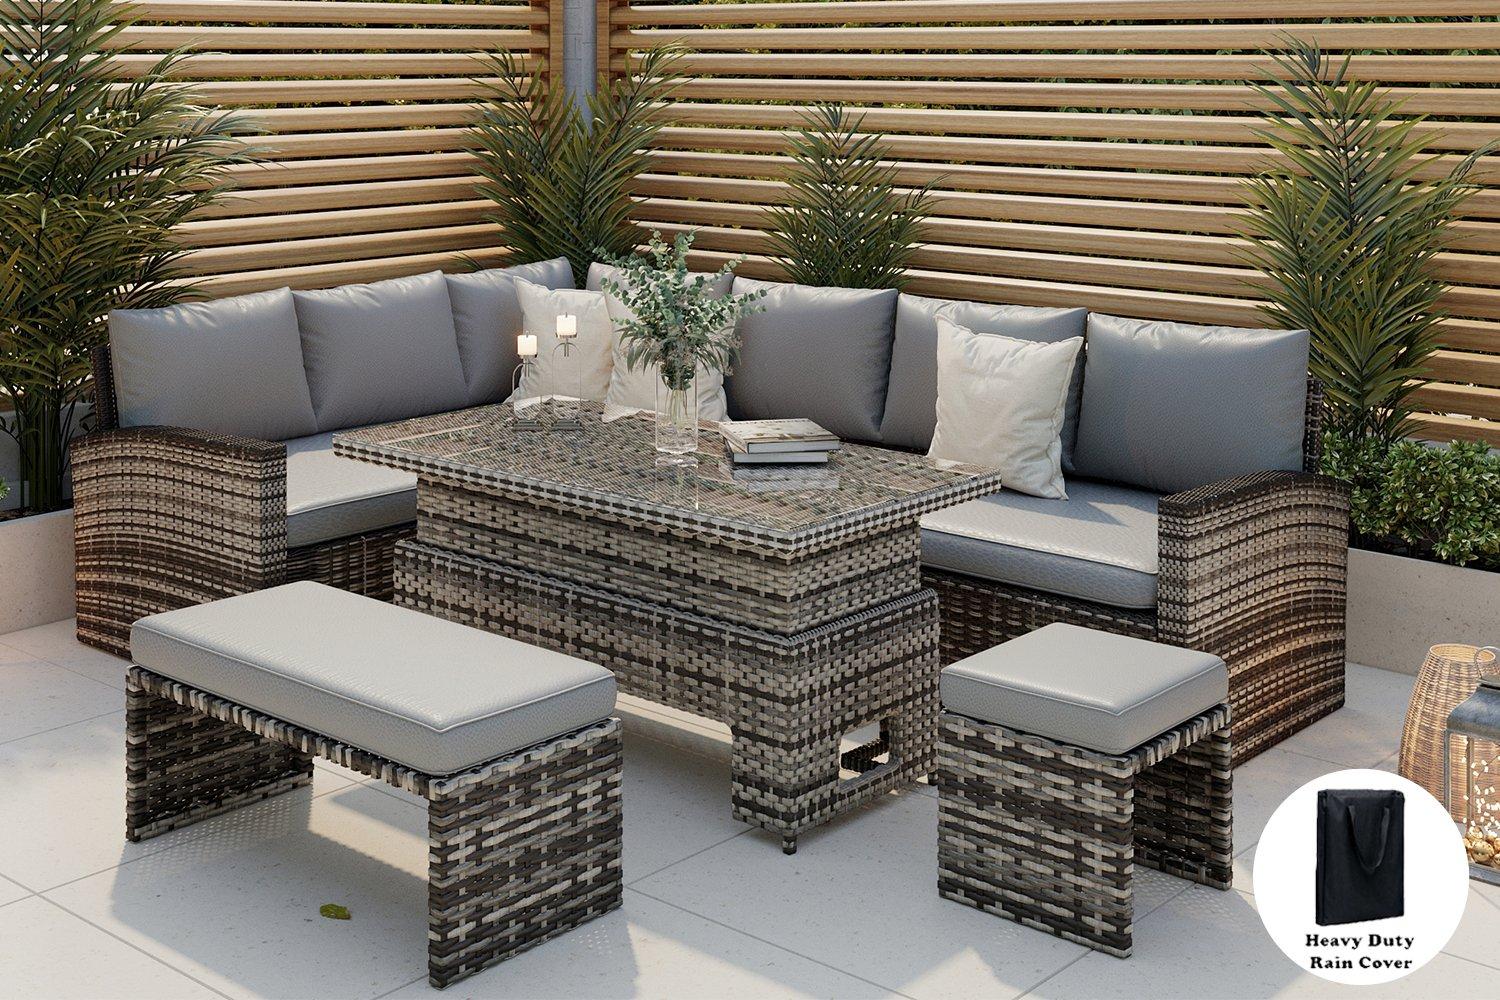 Rosen Rattan Garden Furniture 9 Seater Corner Sofa Rising Table Set With Benches And Rain Cover